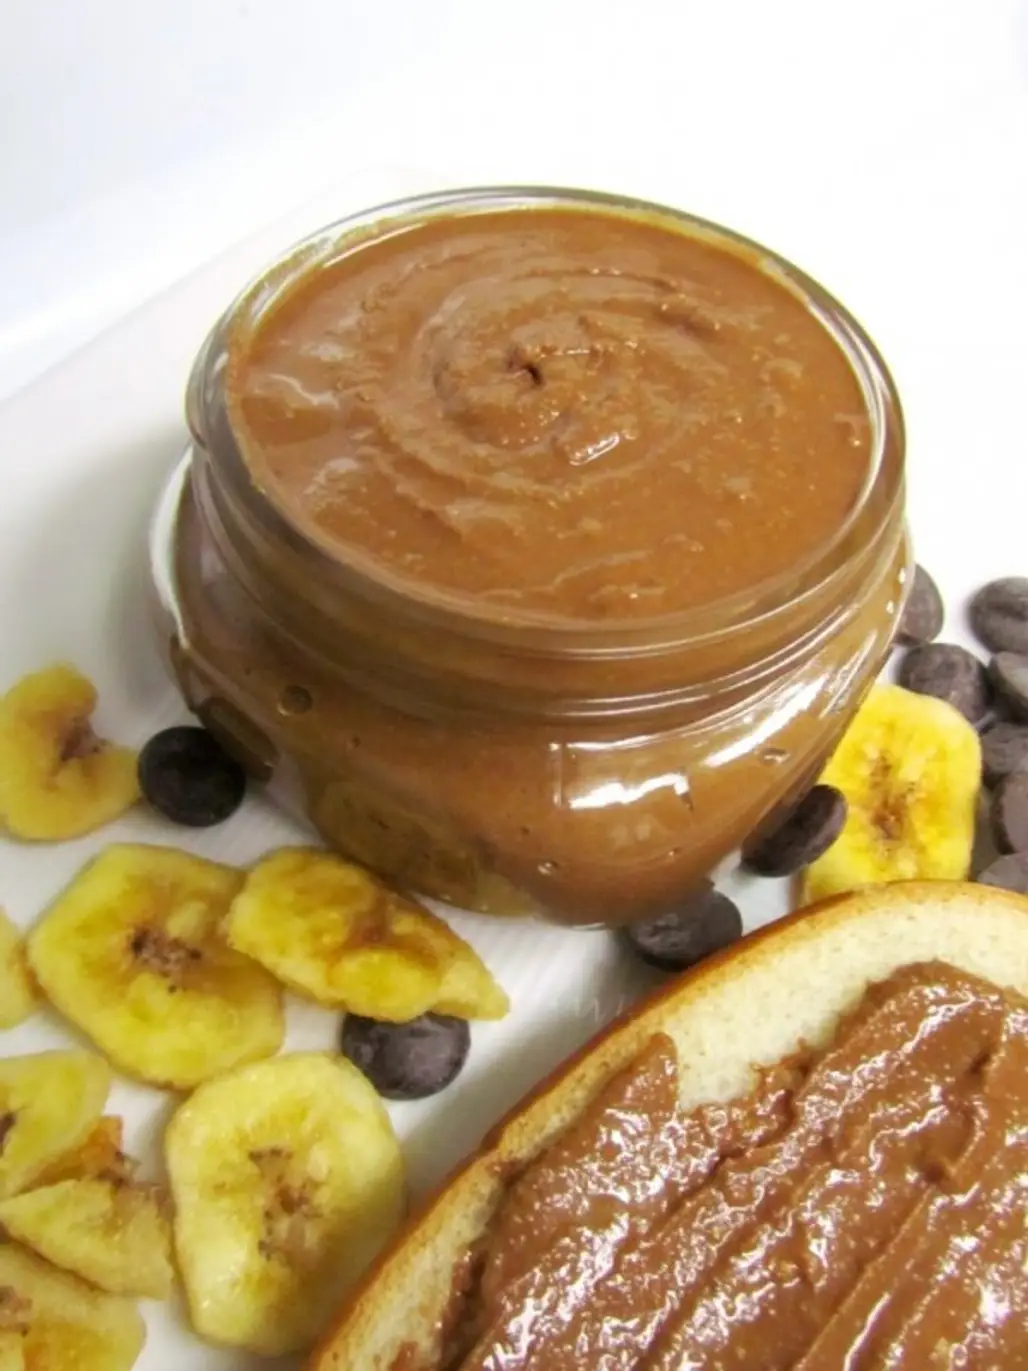 Banana with Peanut Butter